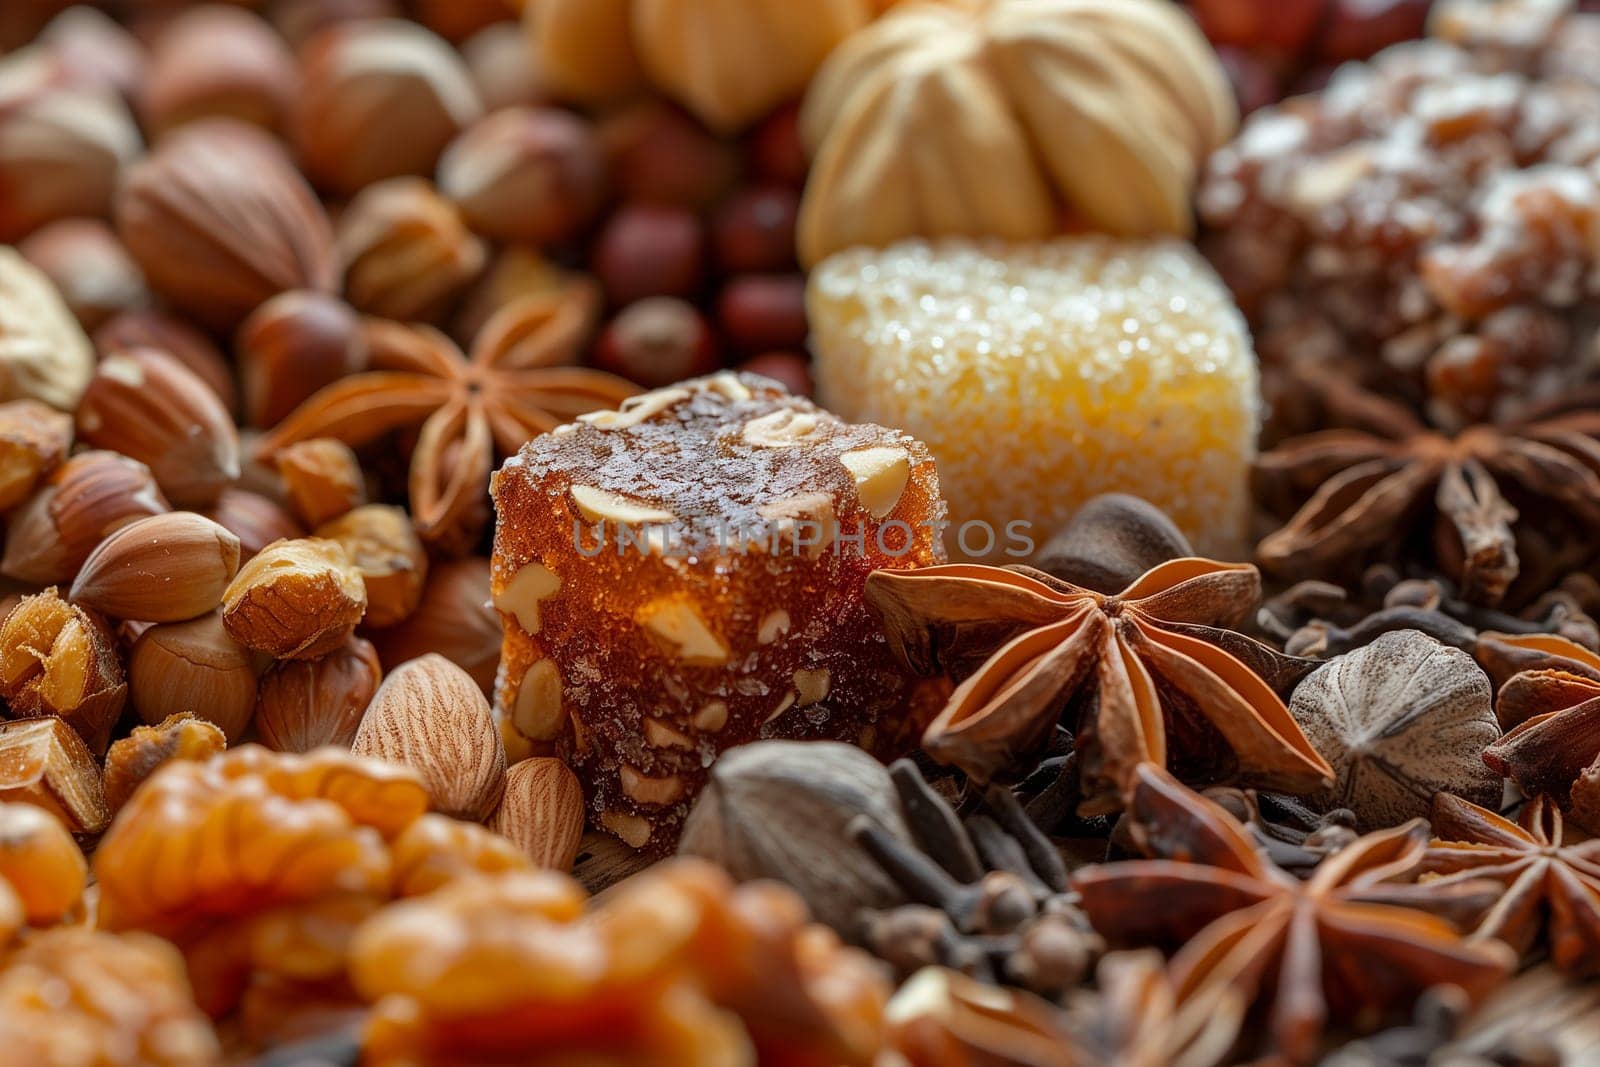 Close Up of Assorted Nuts and Food Items by Sd28DimoN_1976